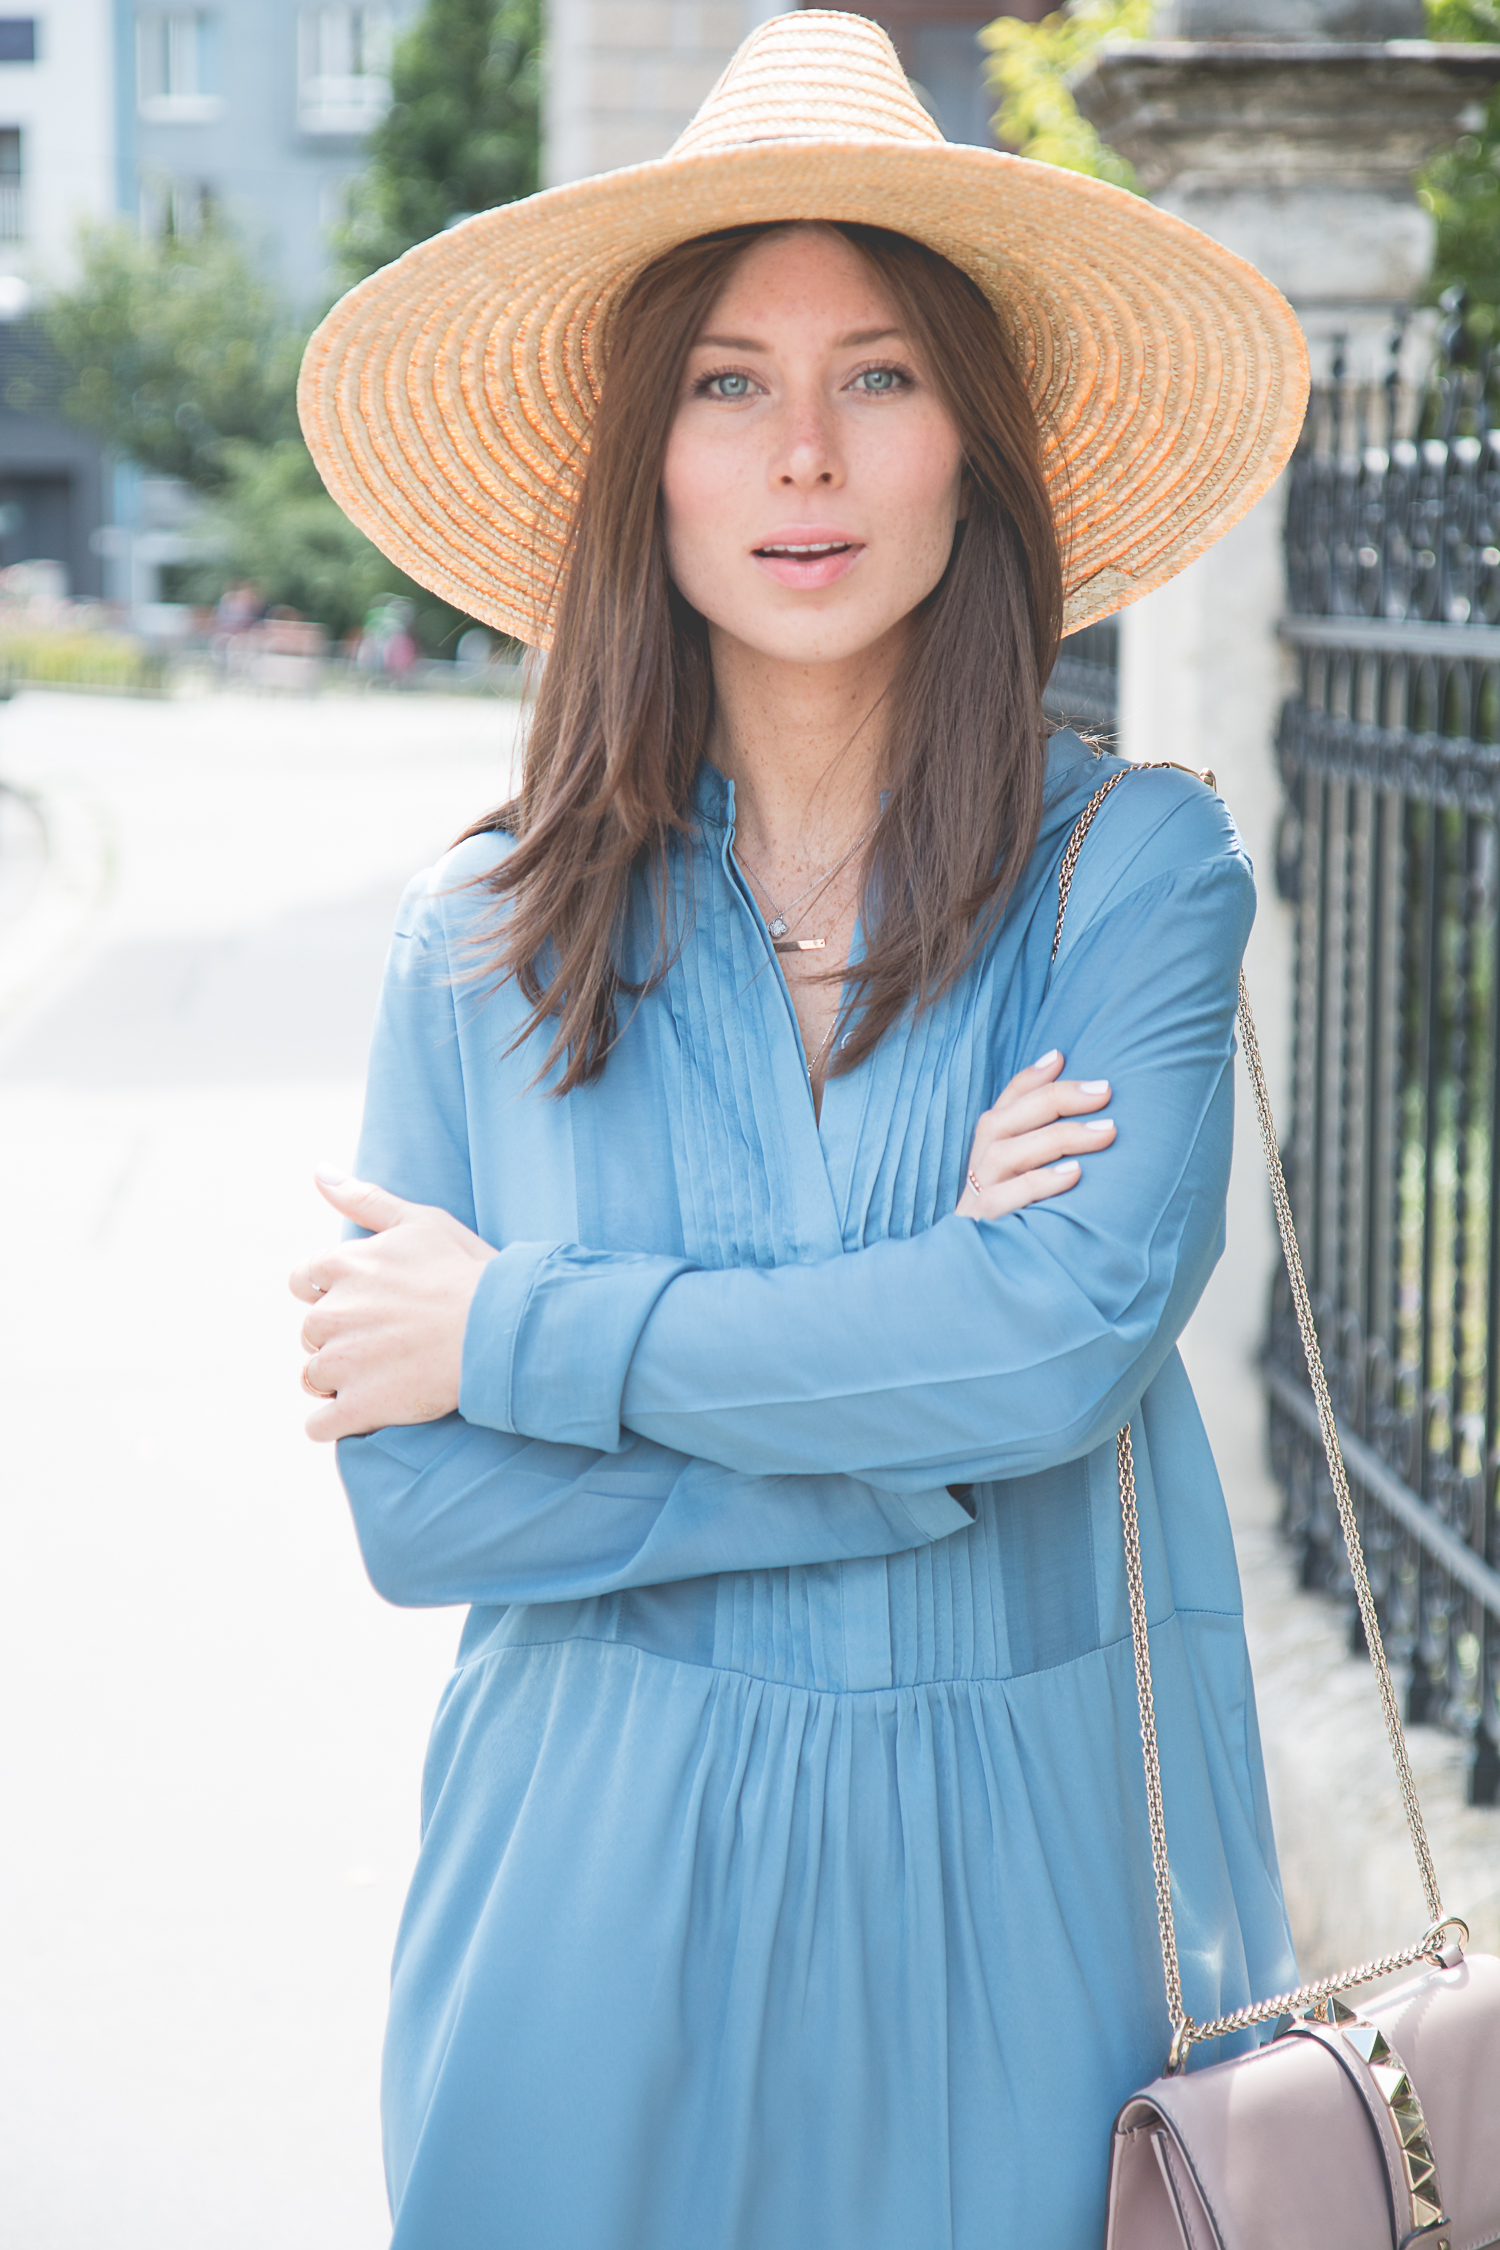 Summer Hats | The Daily Dose